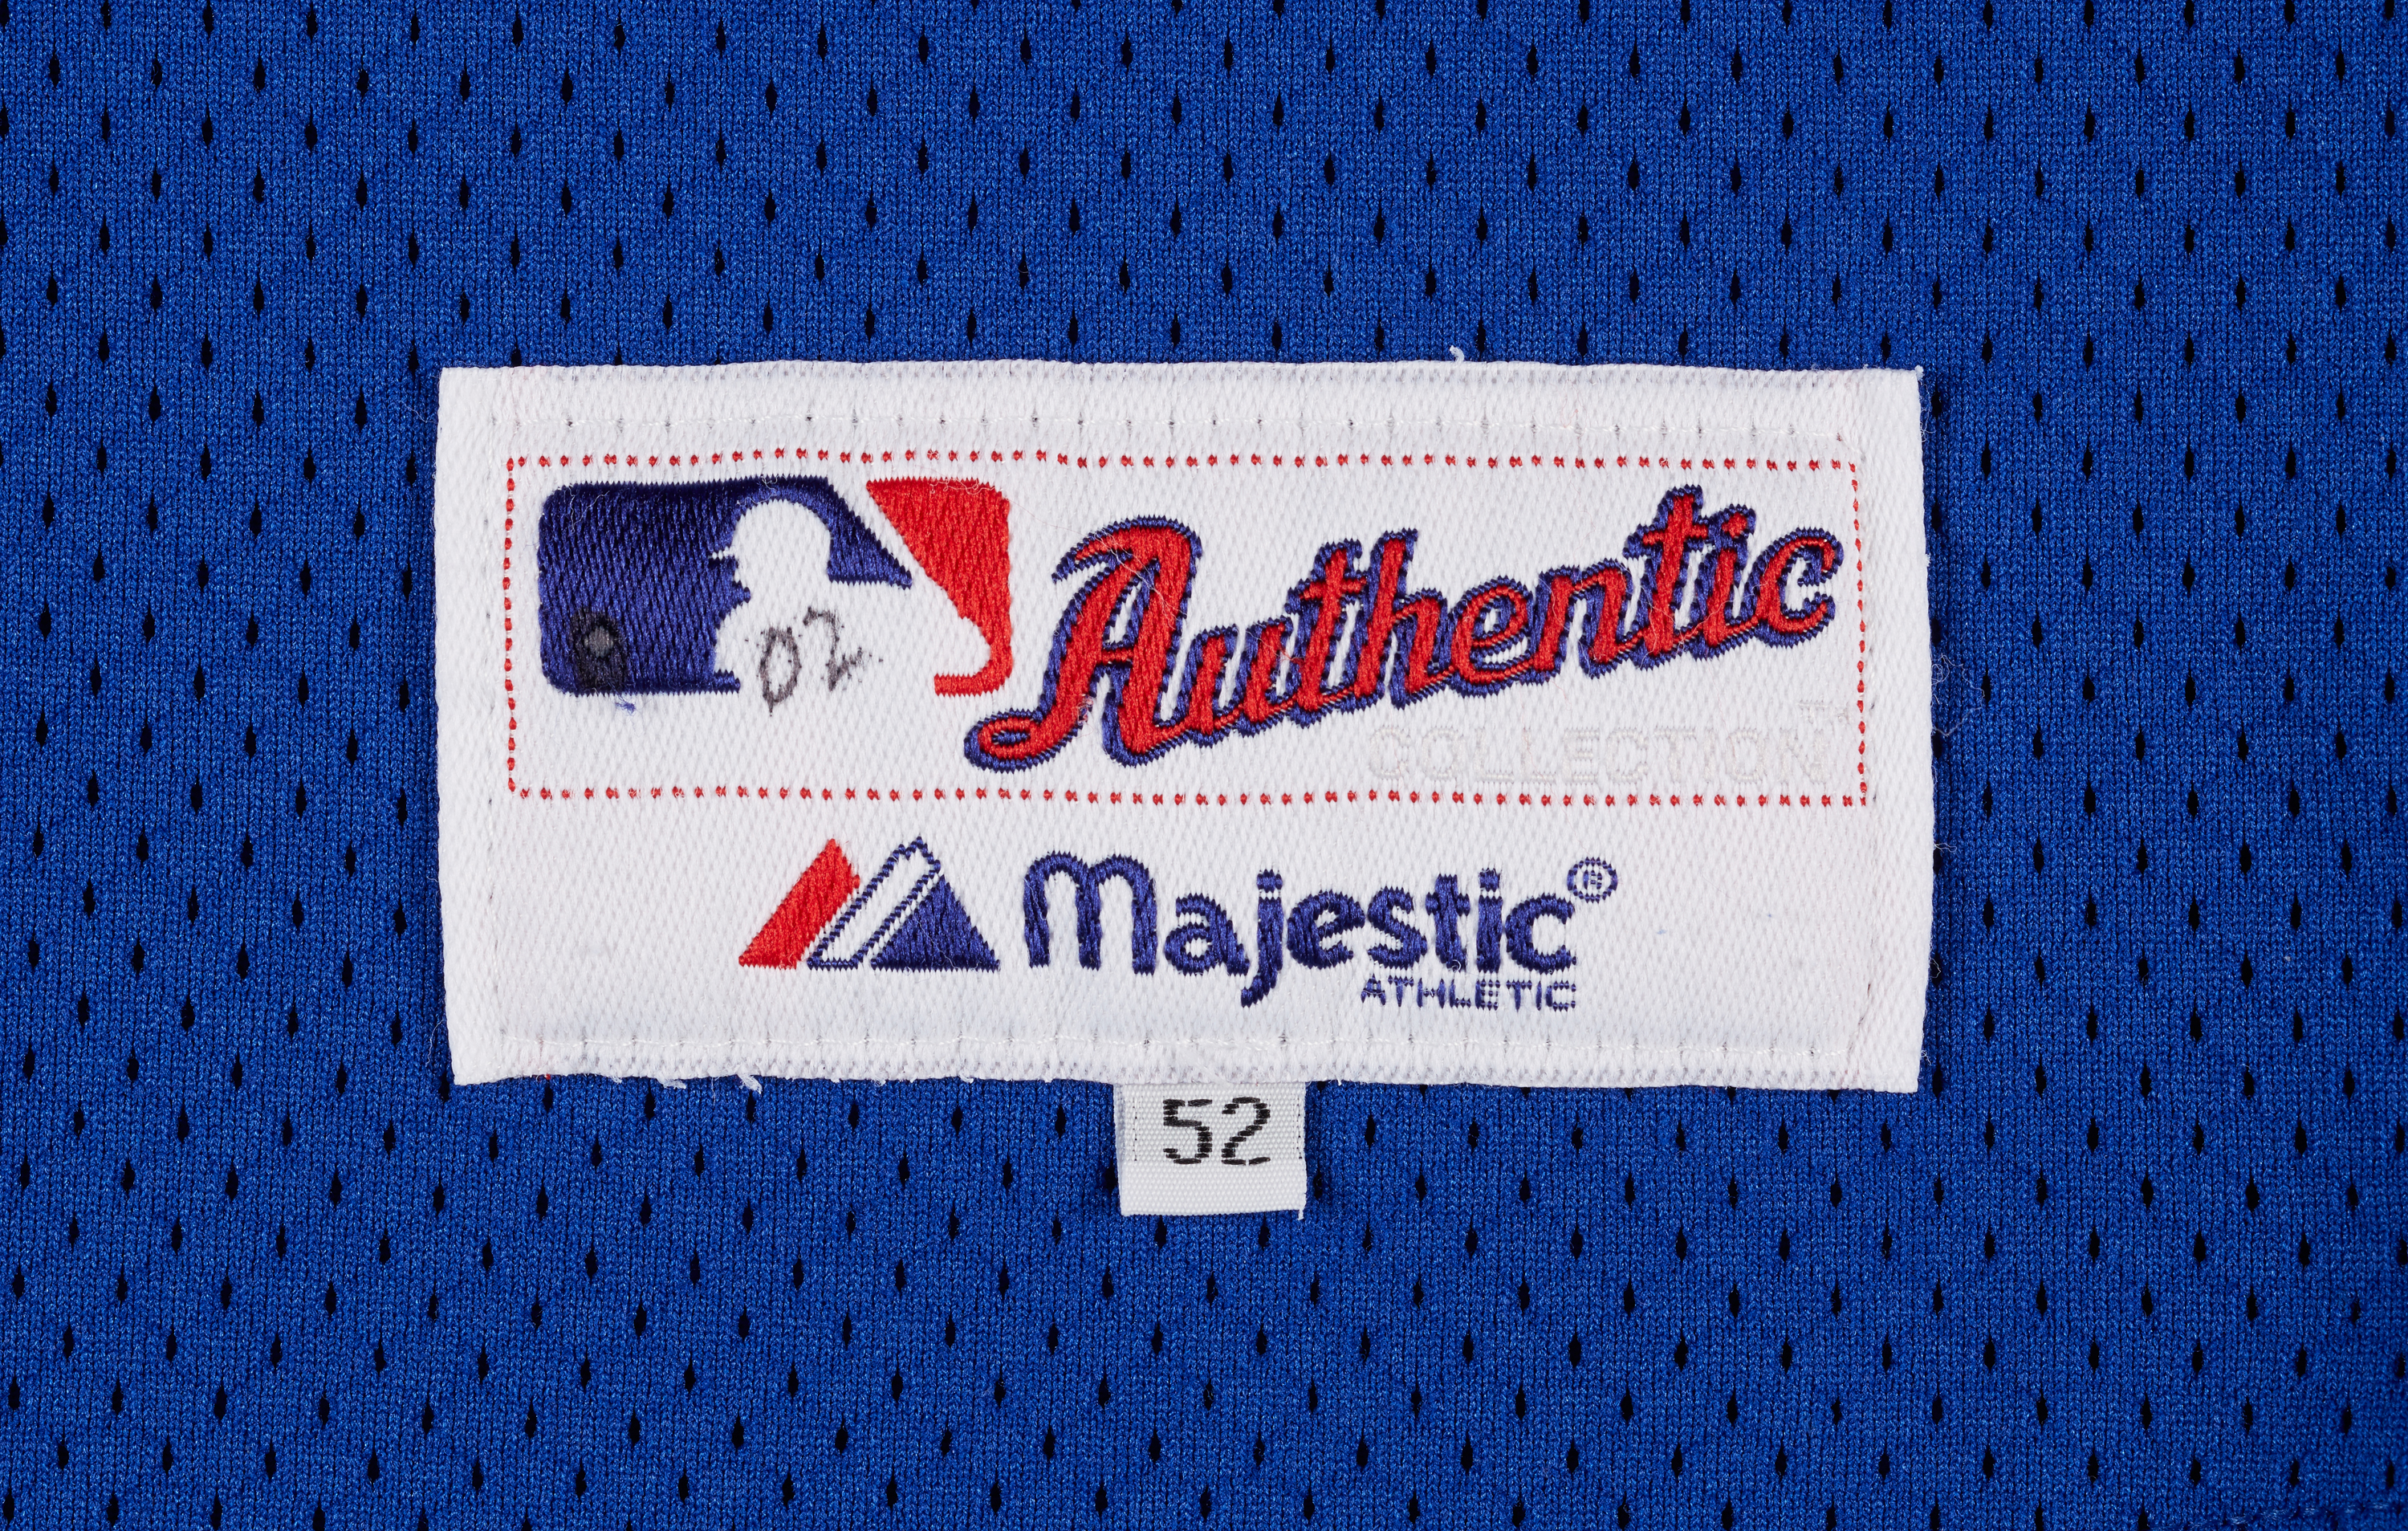 Roy Halladay Used Blue Jays 2001 911 Jersey - Game Used Only